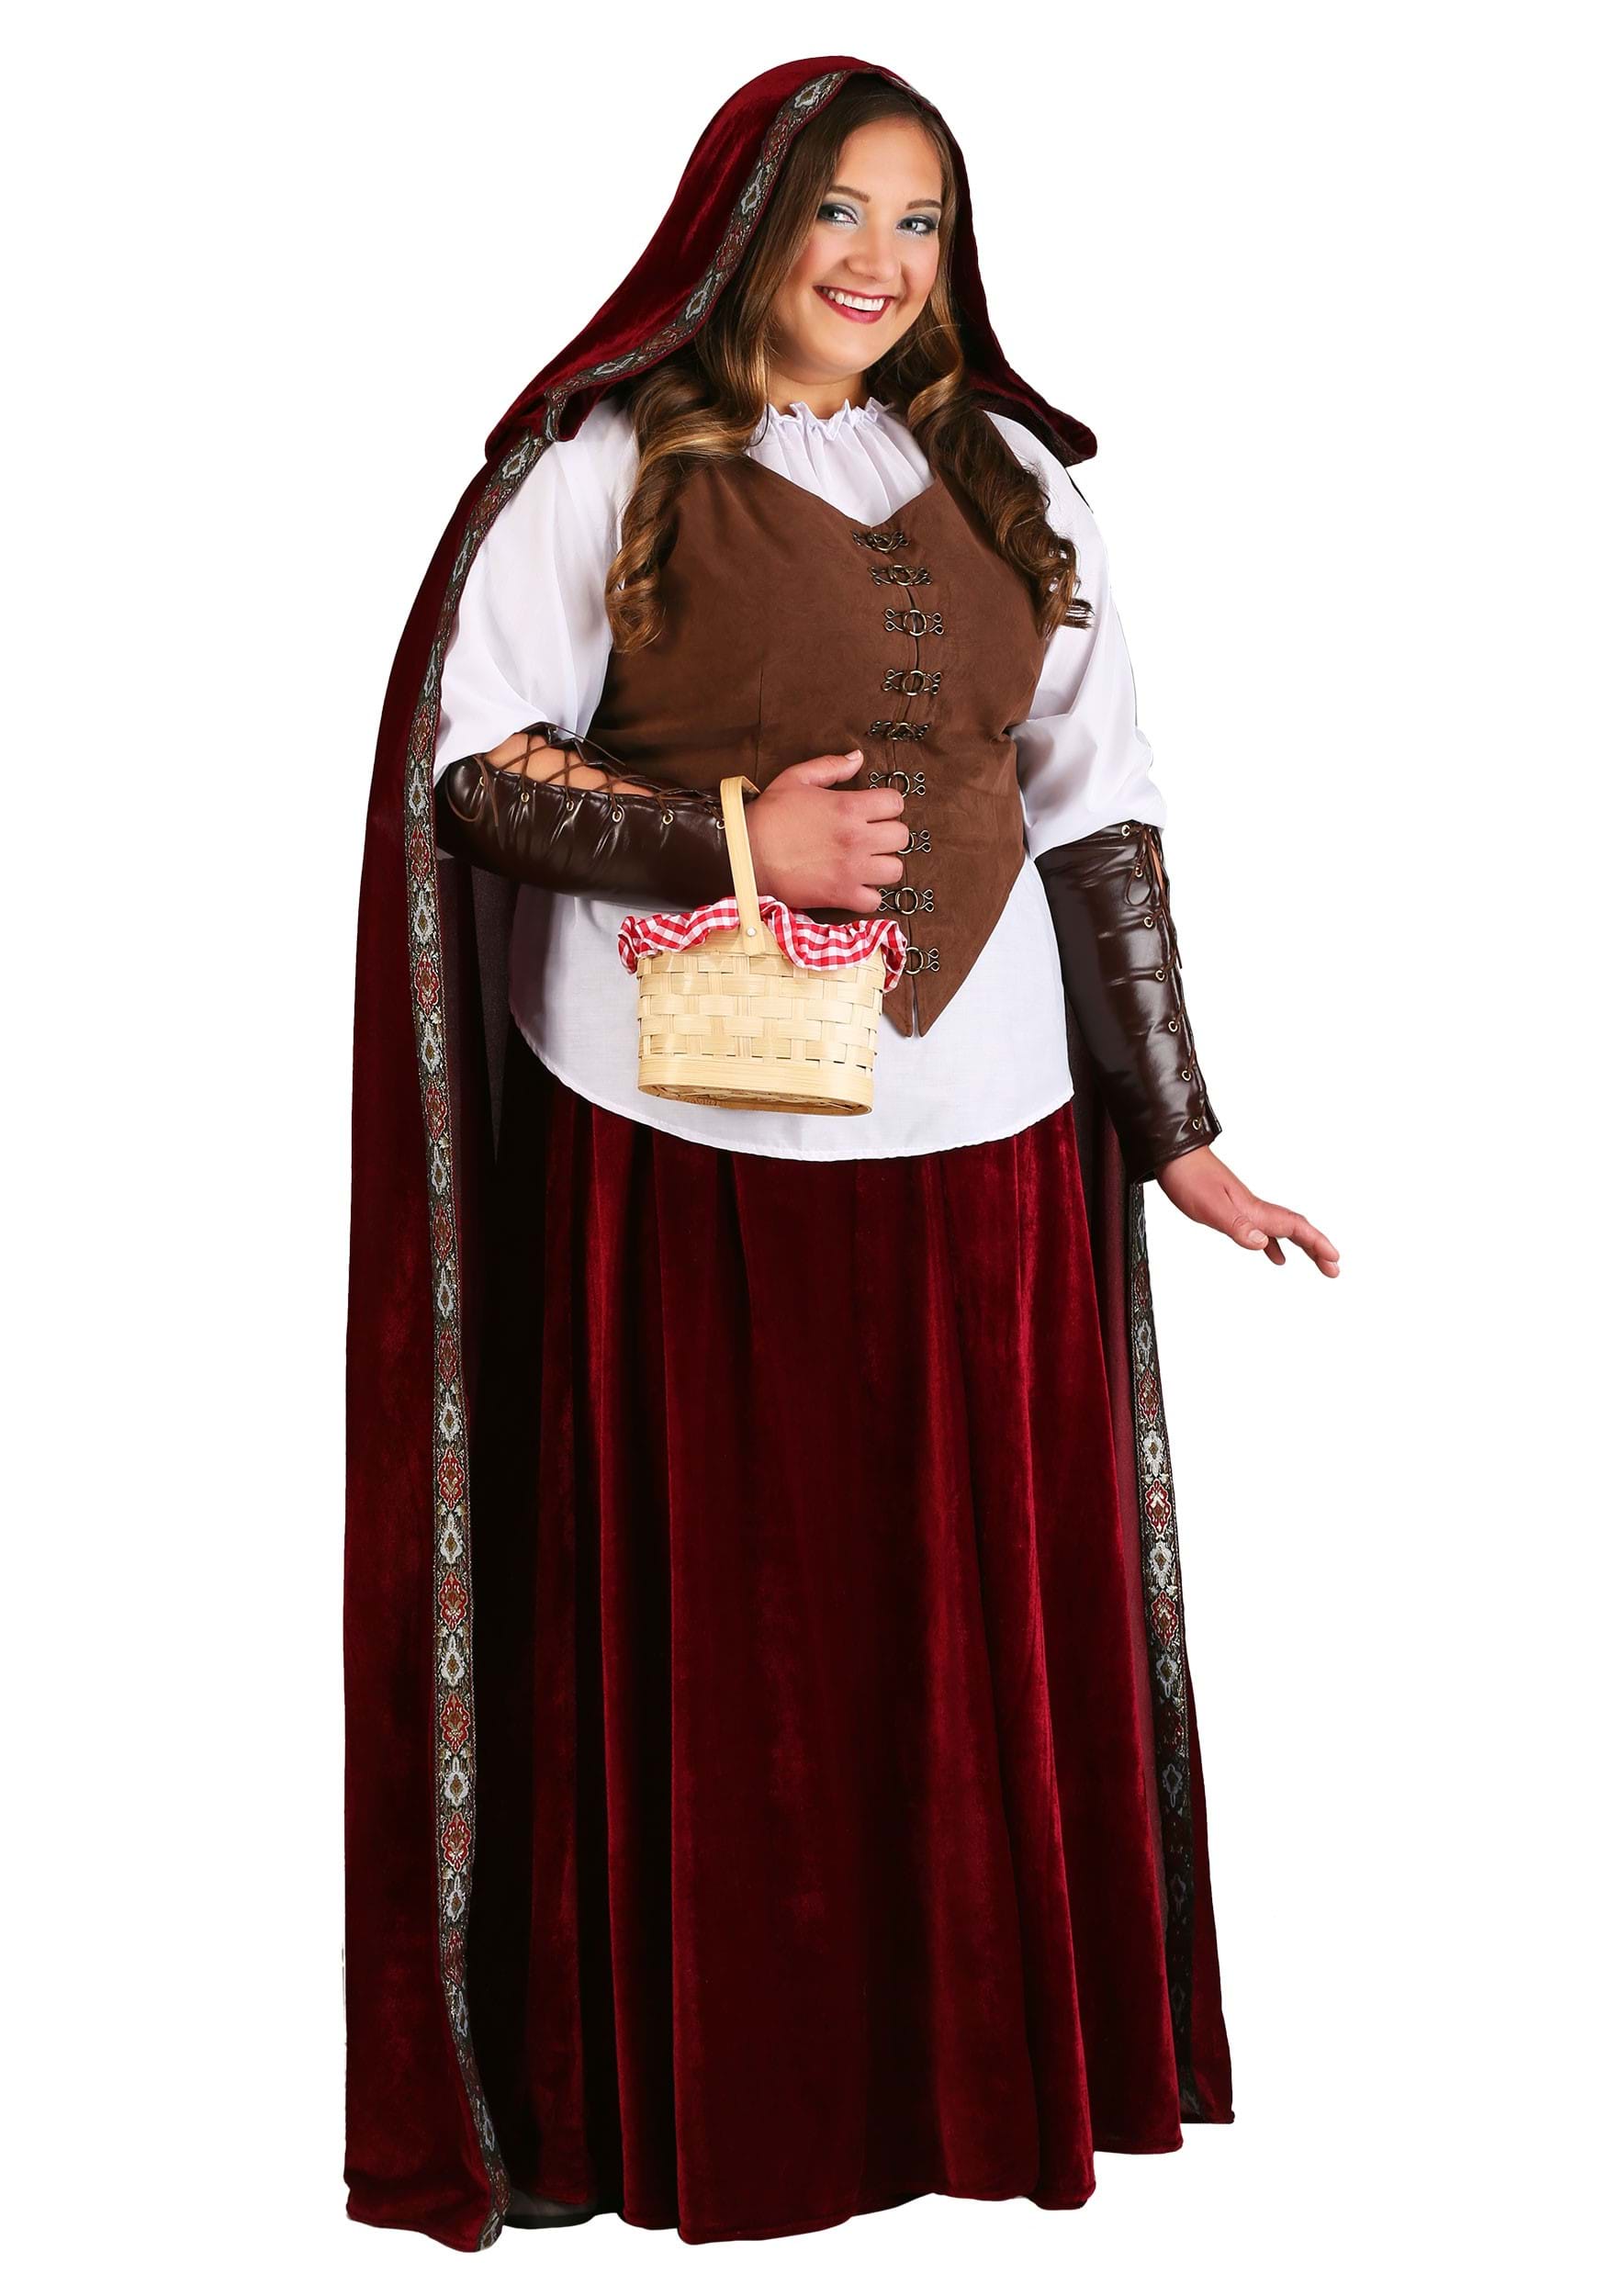 Deluxe Red Riding Hood Plus Size Costume for Women